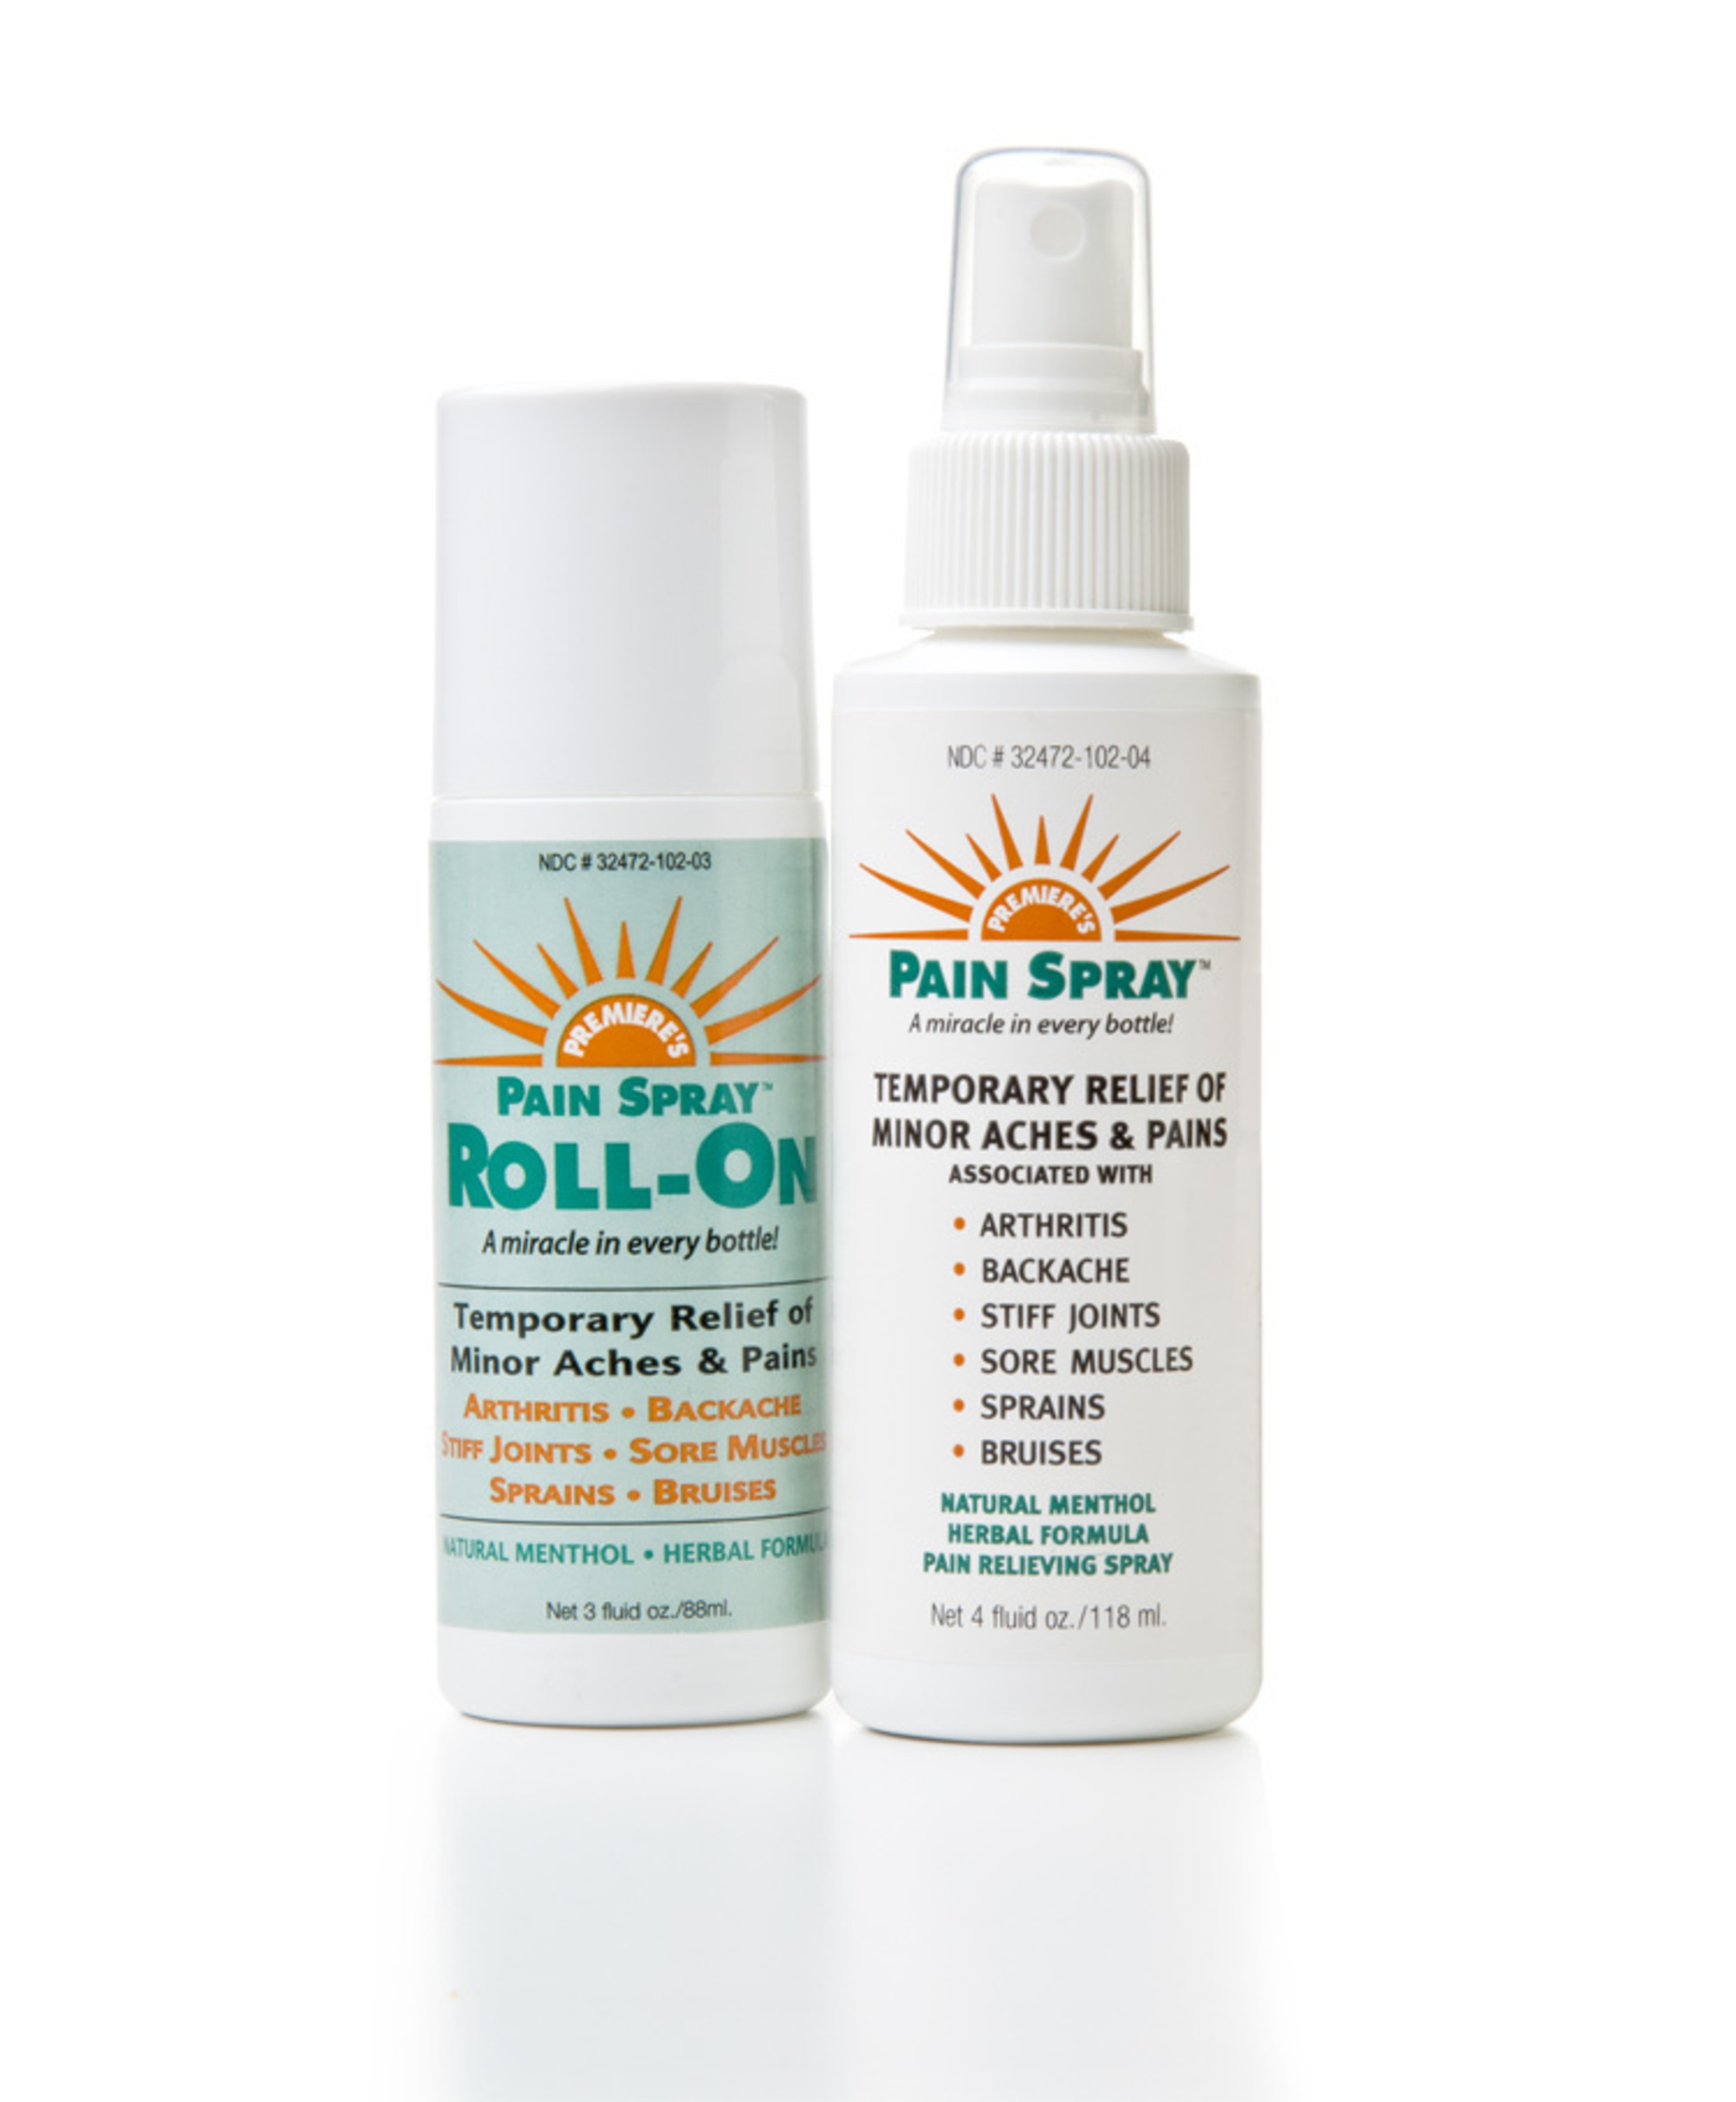 Pain Spray and Pain Spray Roll-On (PRNewsFoto/Amazing Solutions)